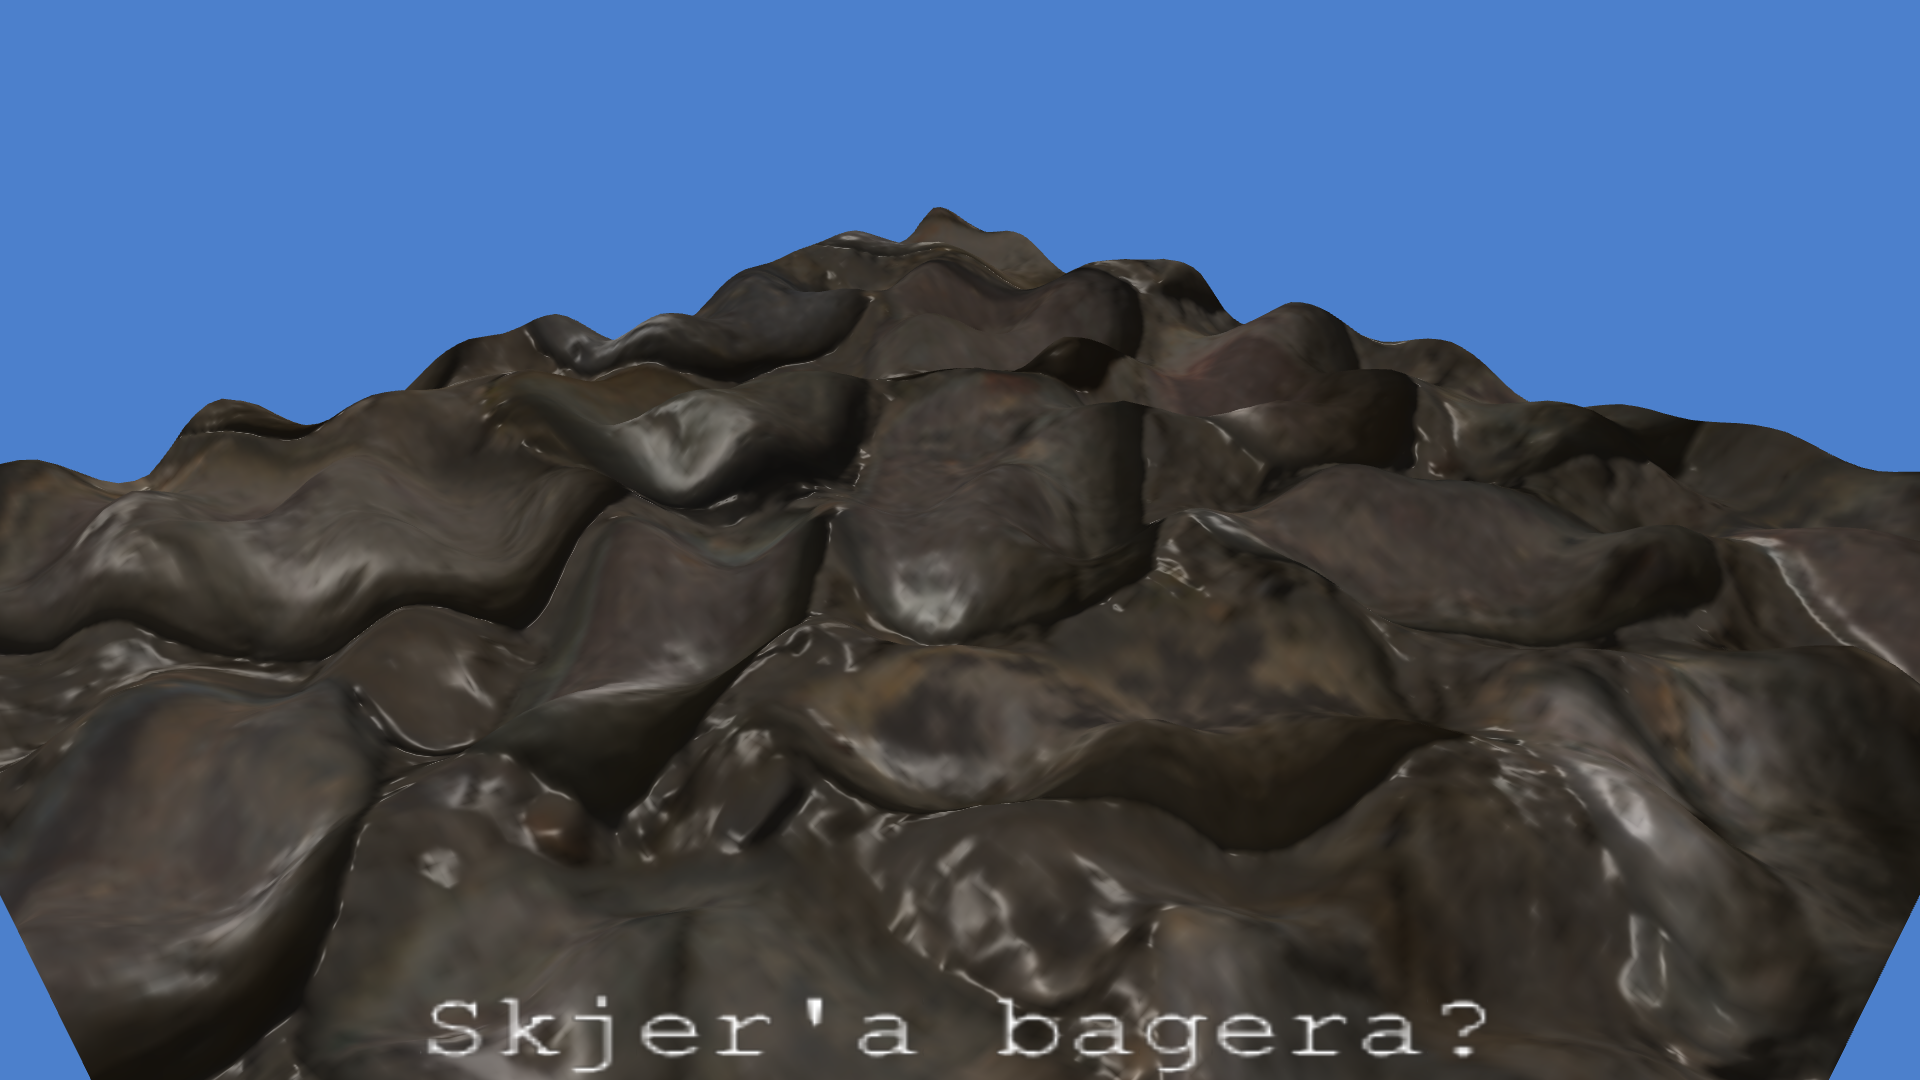 The plane from @fig:img-base with a perlin noise displacement map applied to it